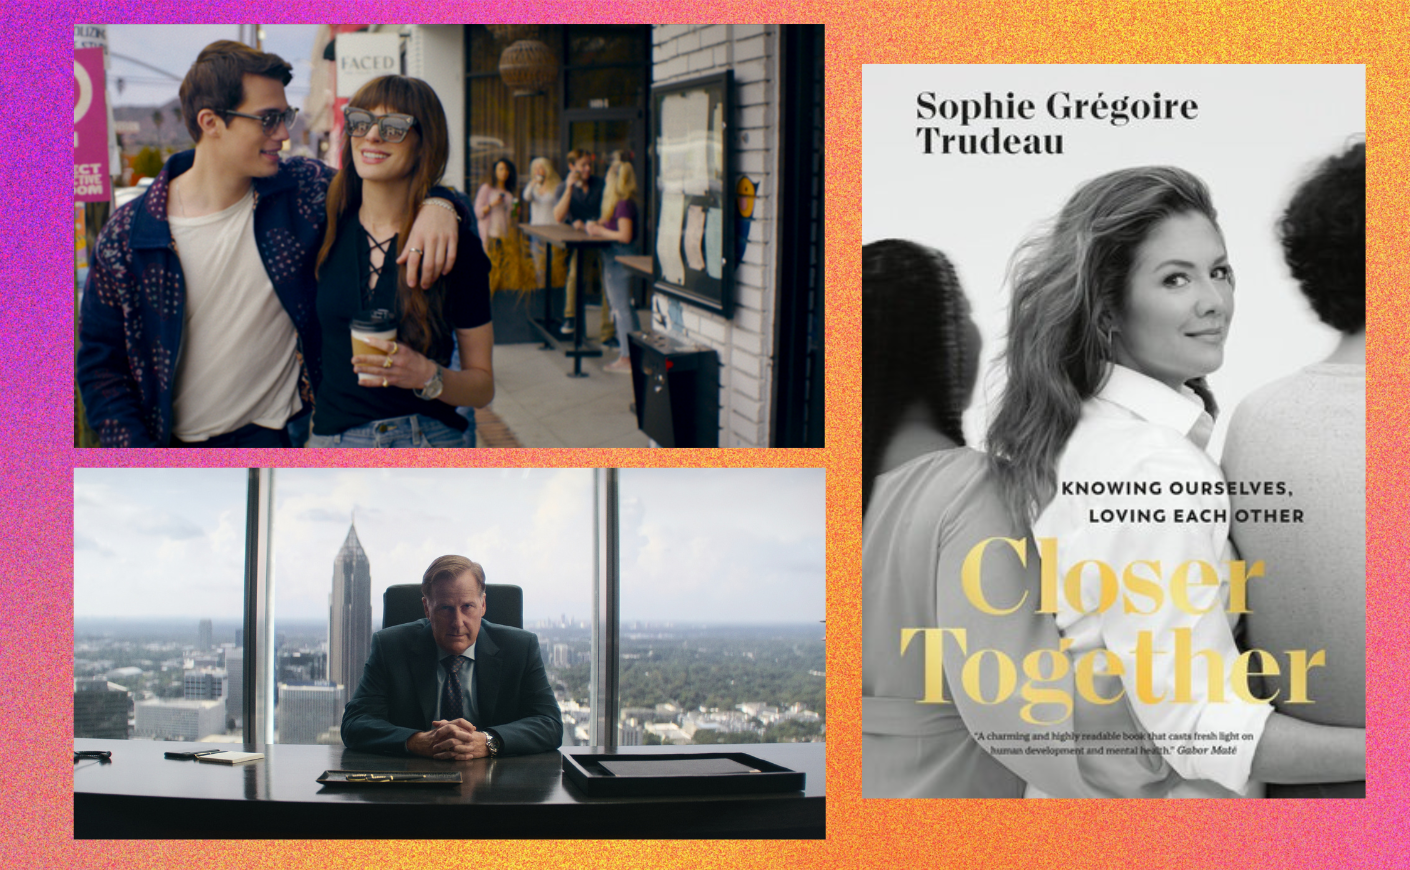 Anne Hathaway in The Idea of You, Jeff Daniels in A Man in Full, Sophie Trudeau's book cover